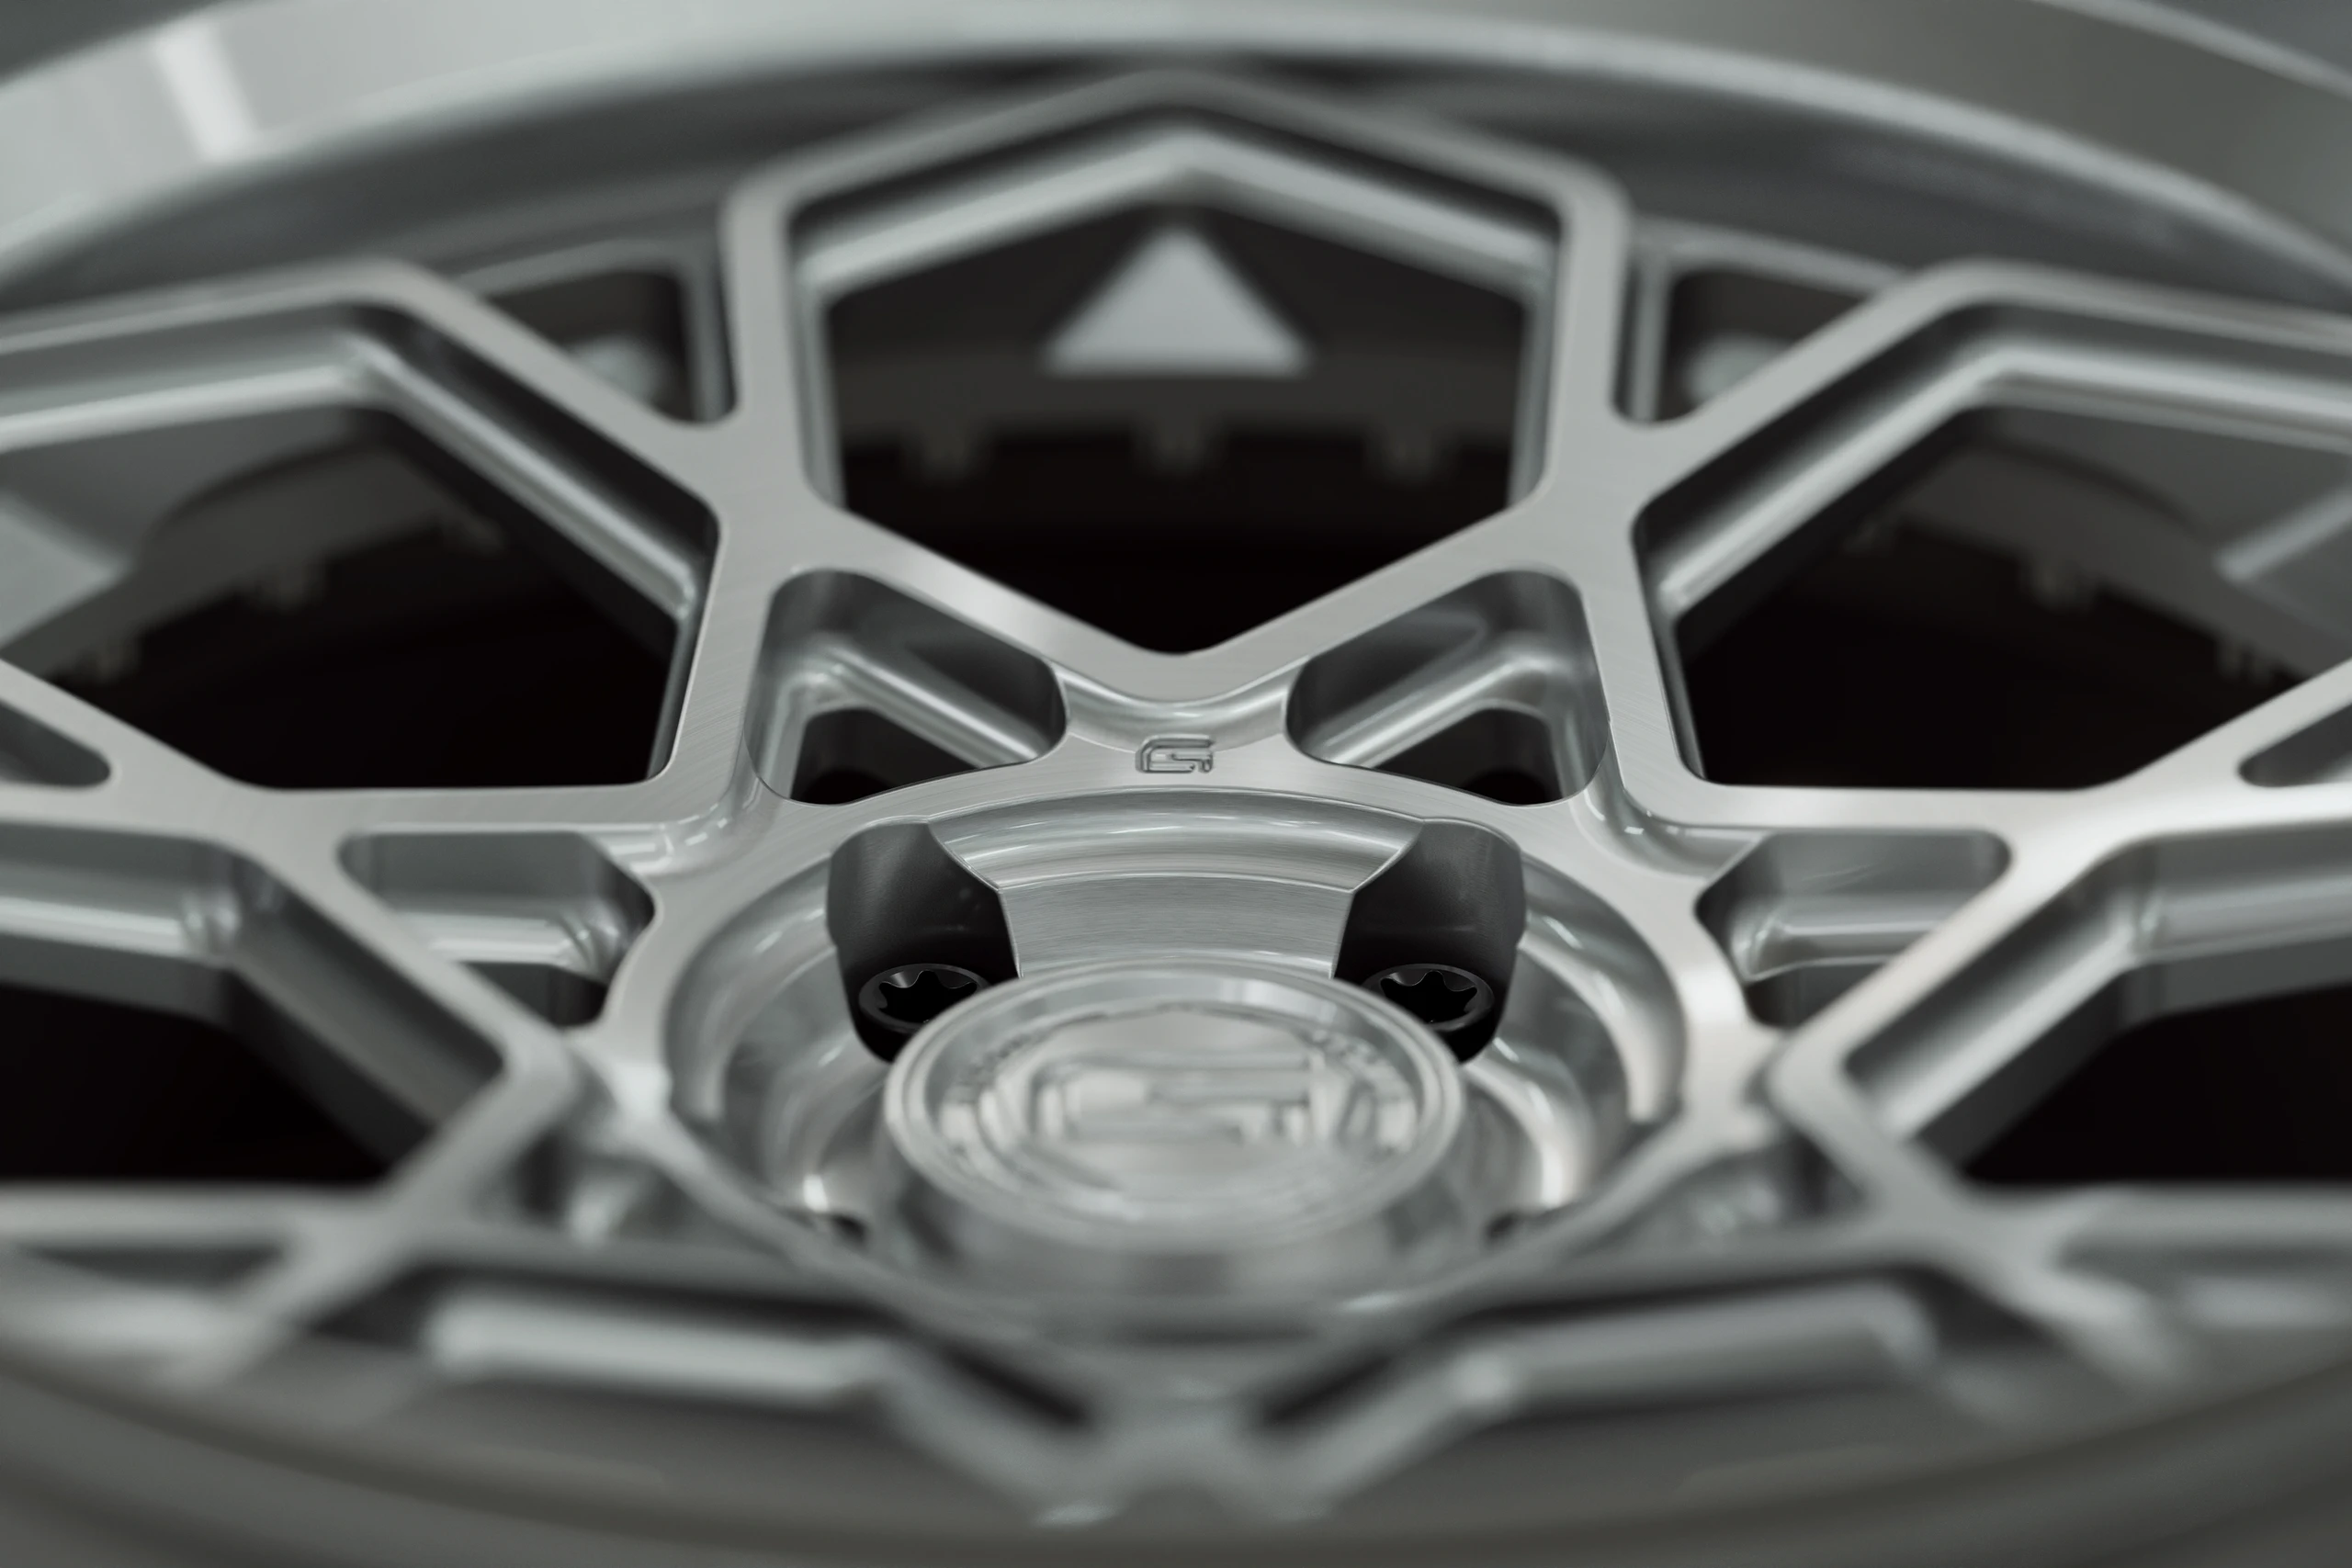 Three-quarter view of a grey G67 3-piece wheel from Govad Forged Evolution series